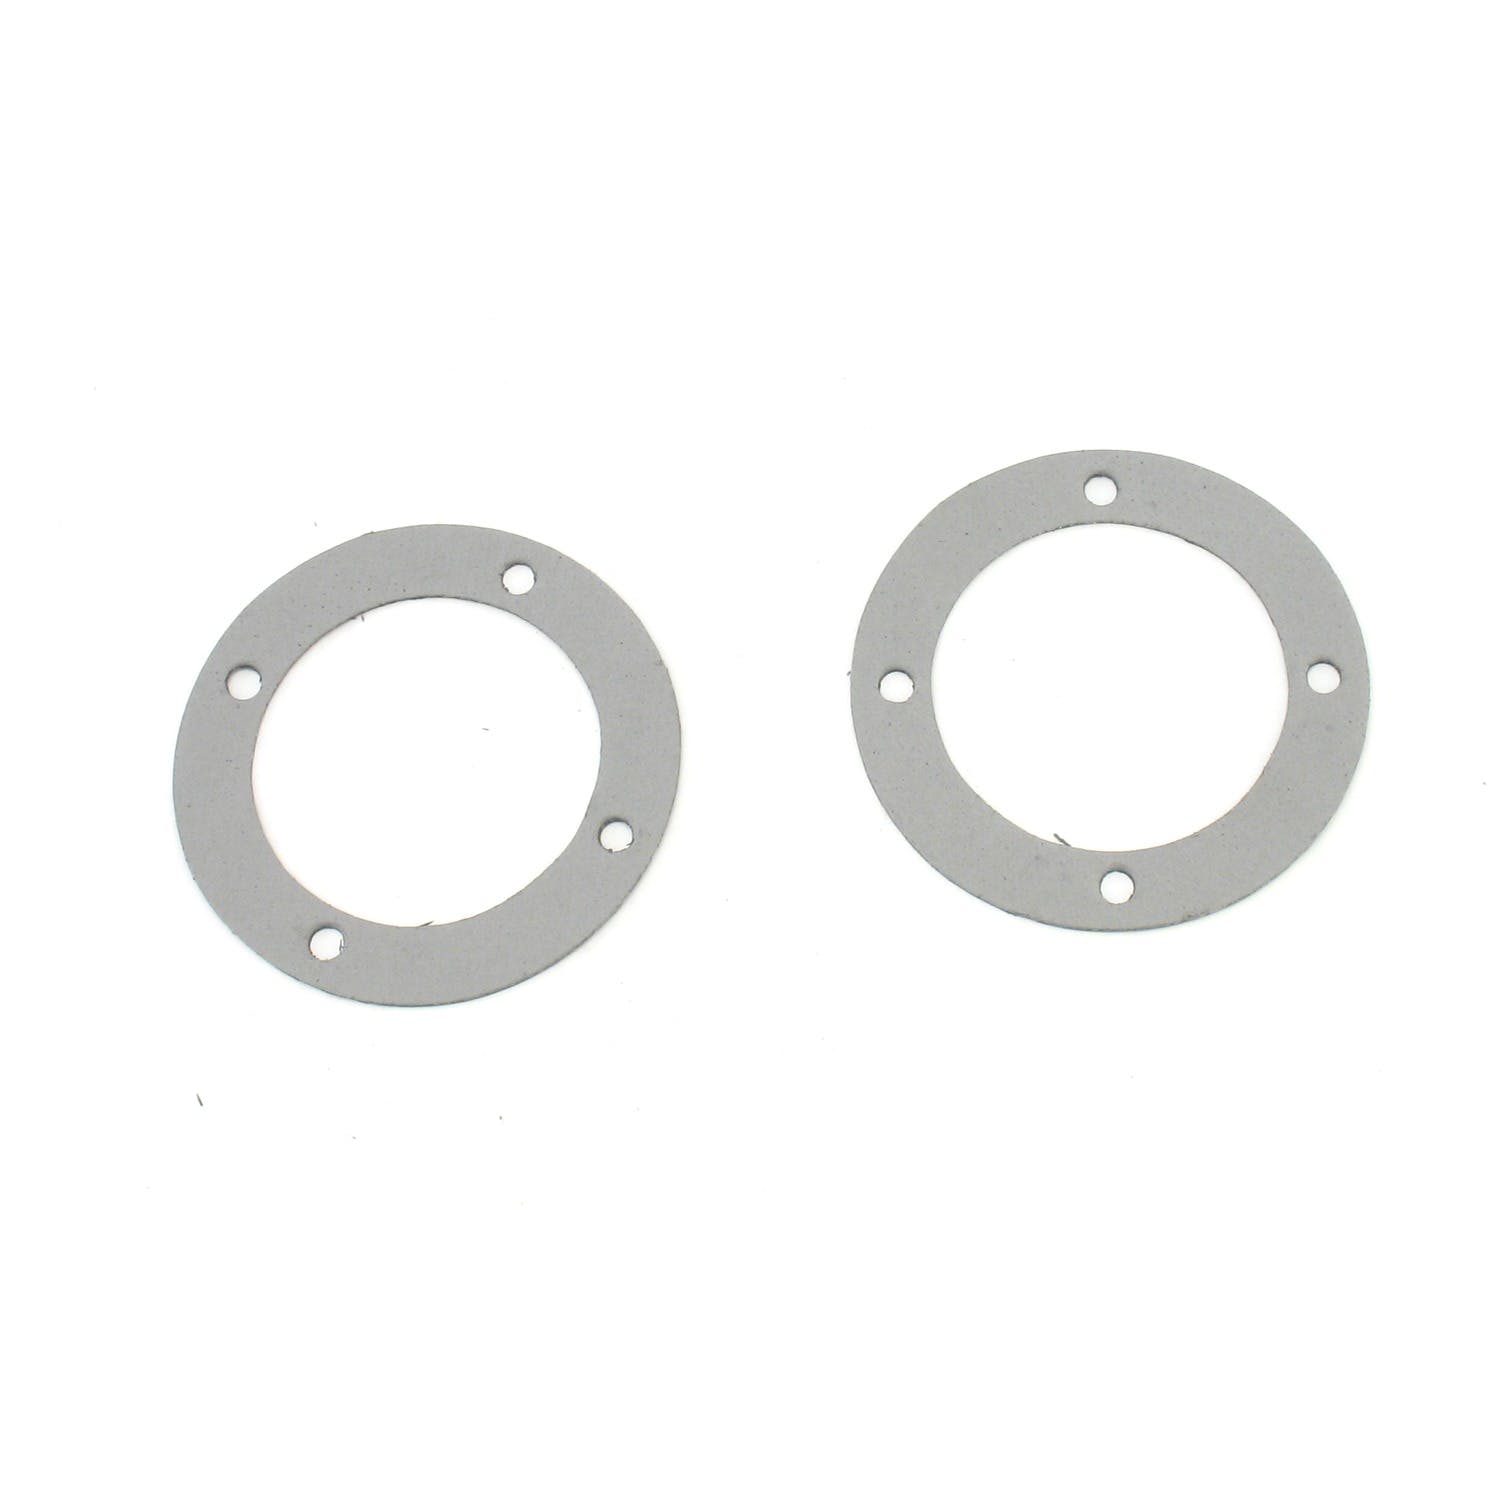 Patriot Exhaust H7957 3 1/2 inch Collector Gasket Universal Pair